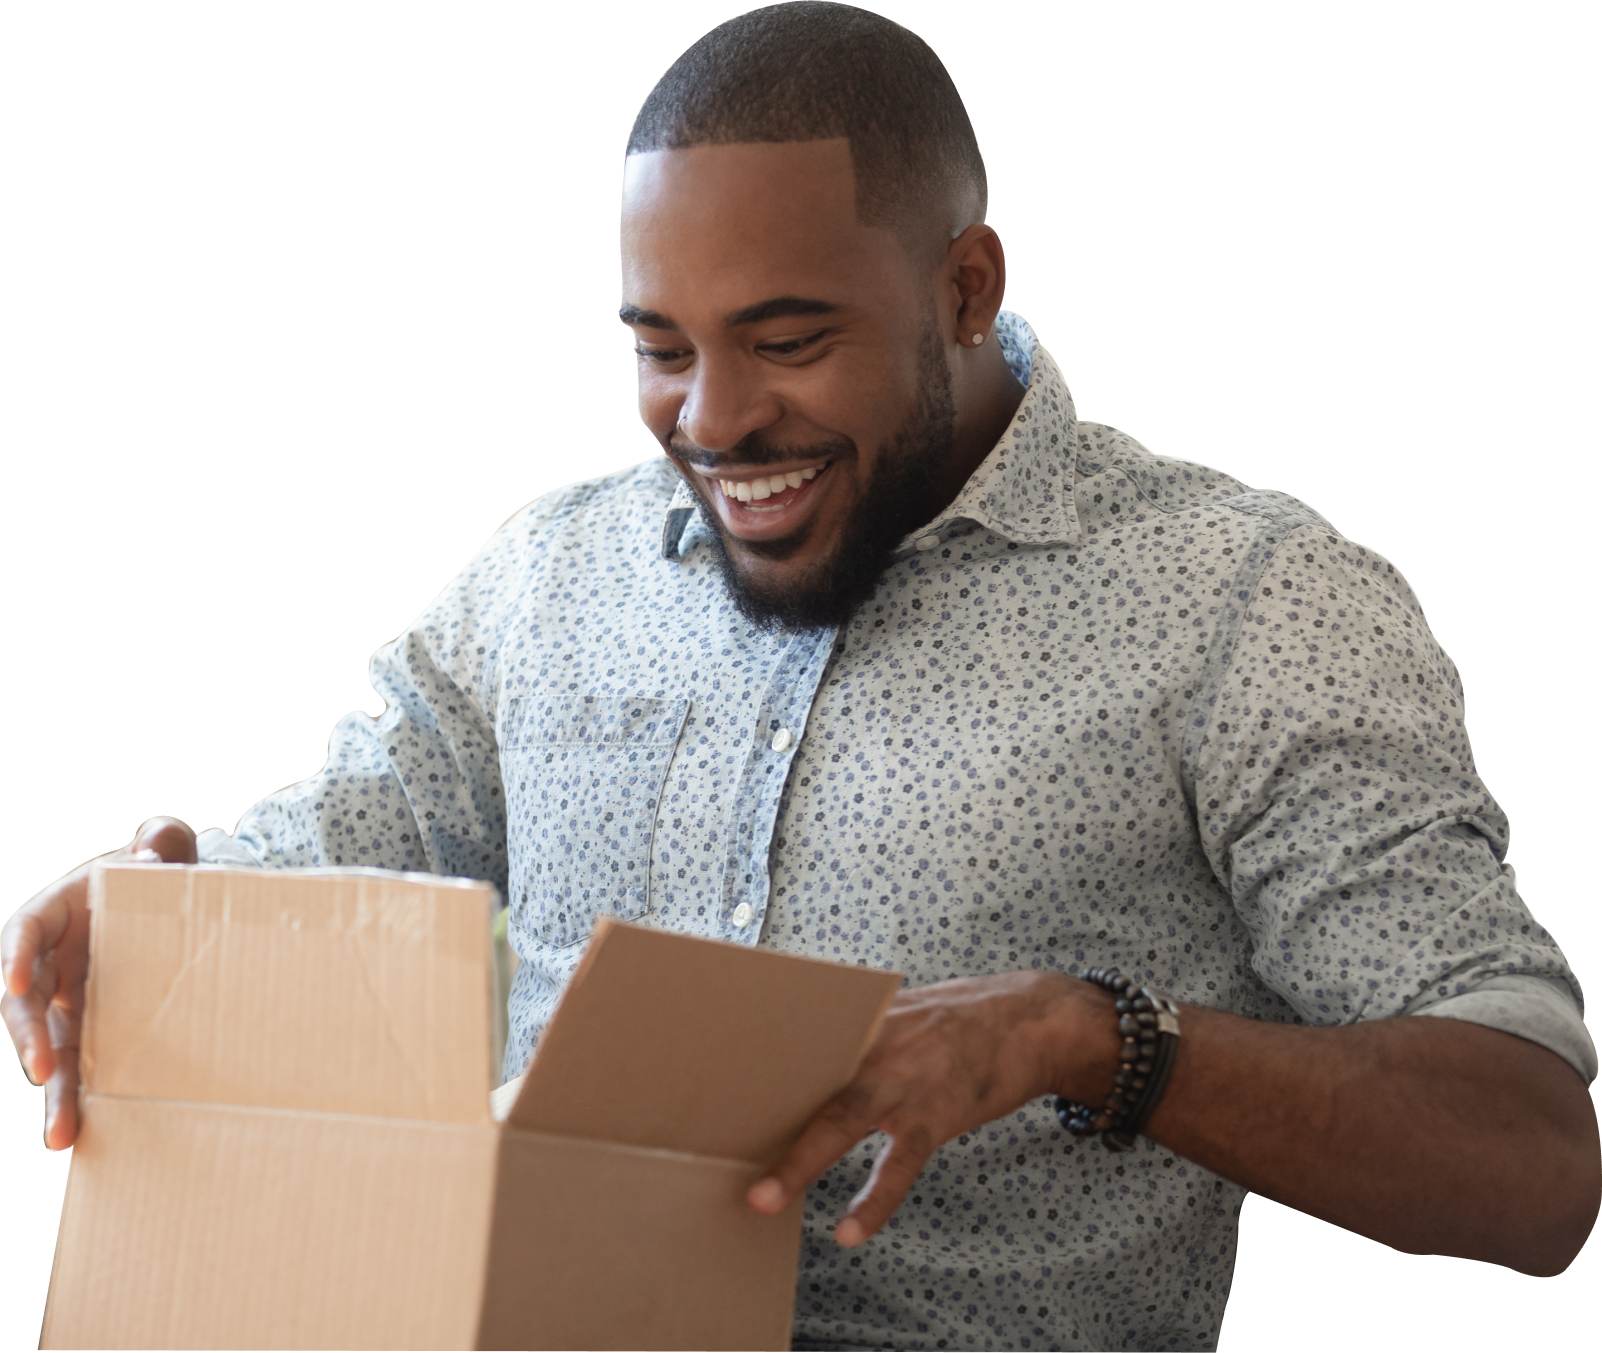 excited man looking inside open cardboard box